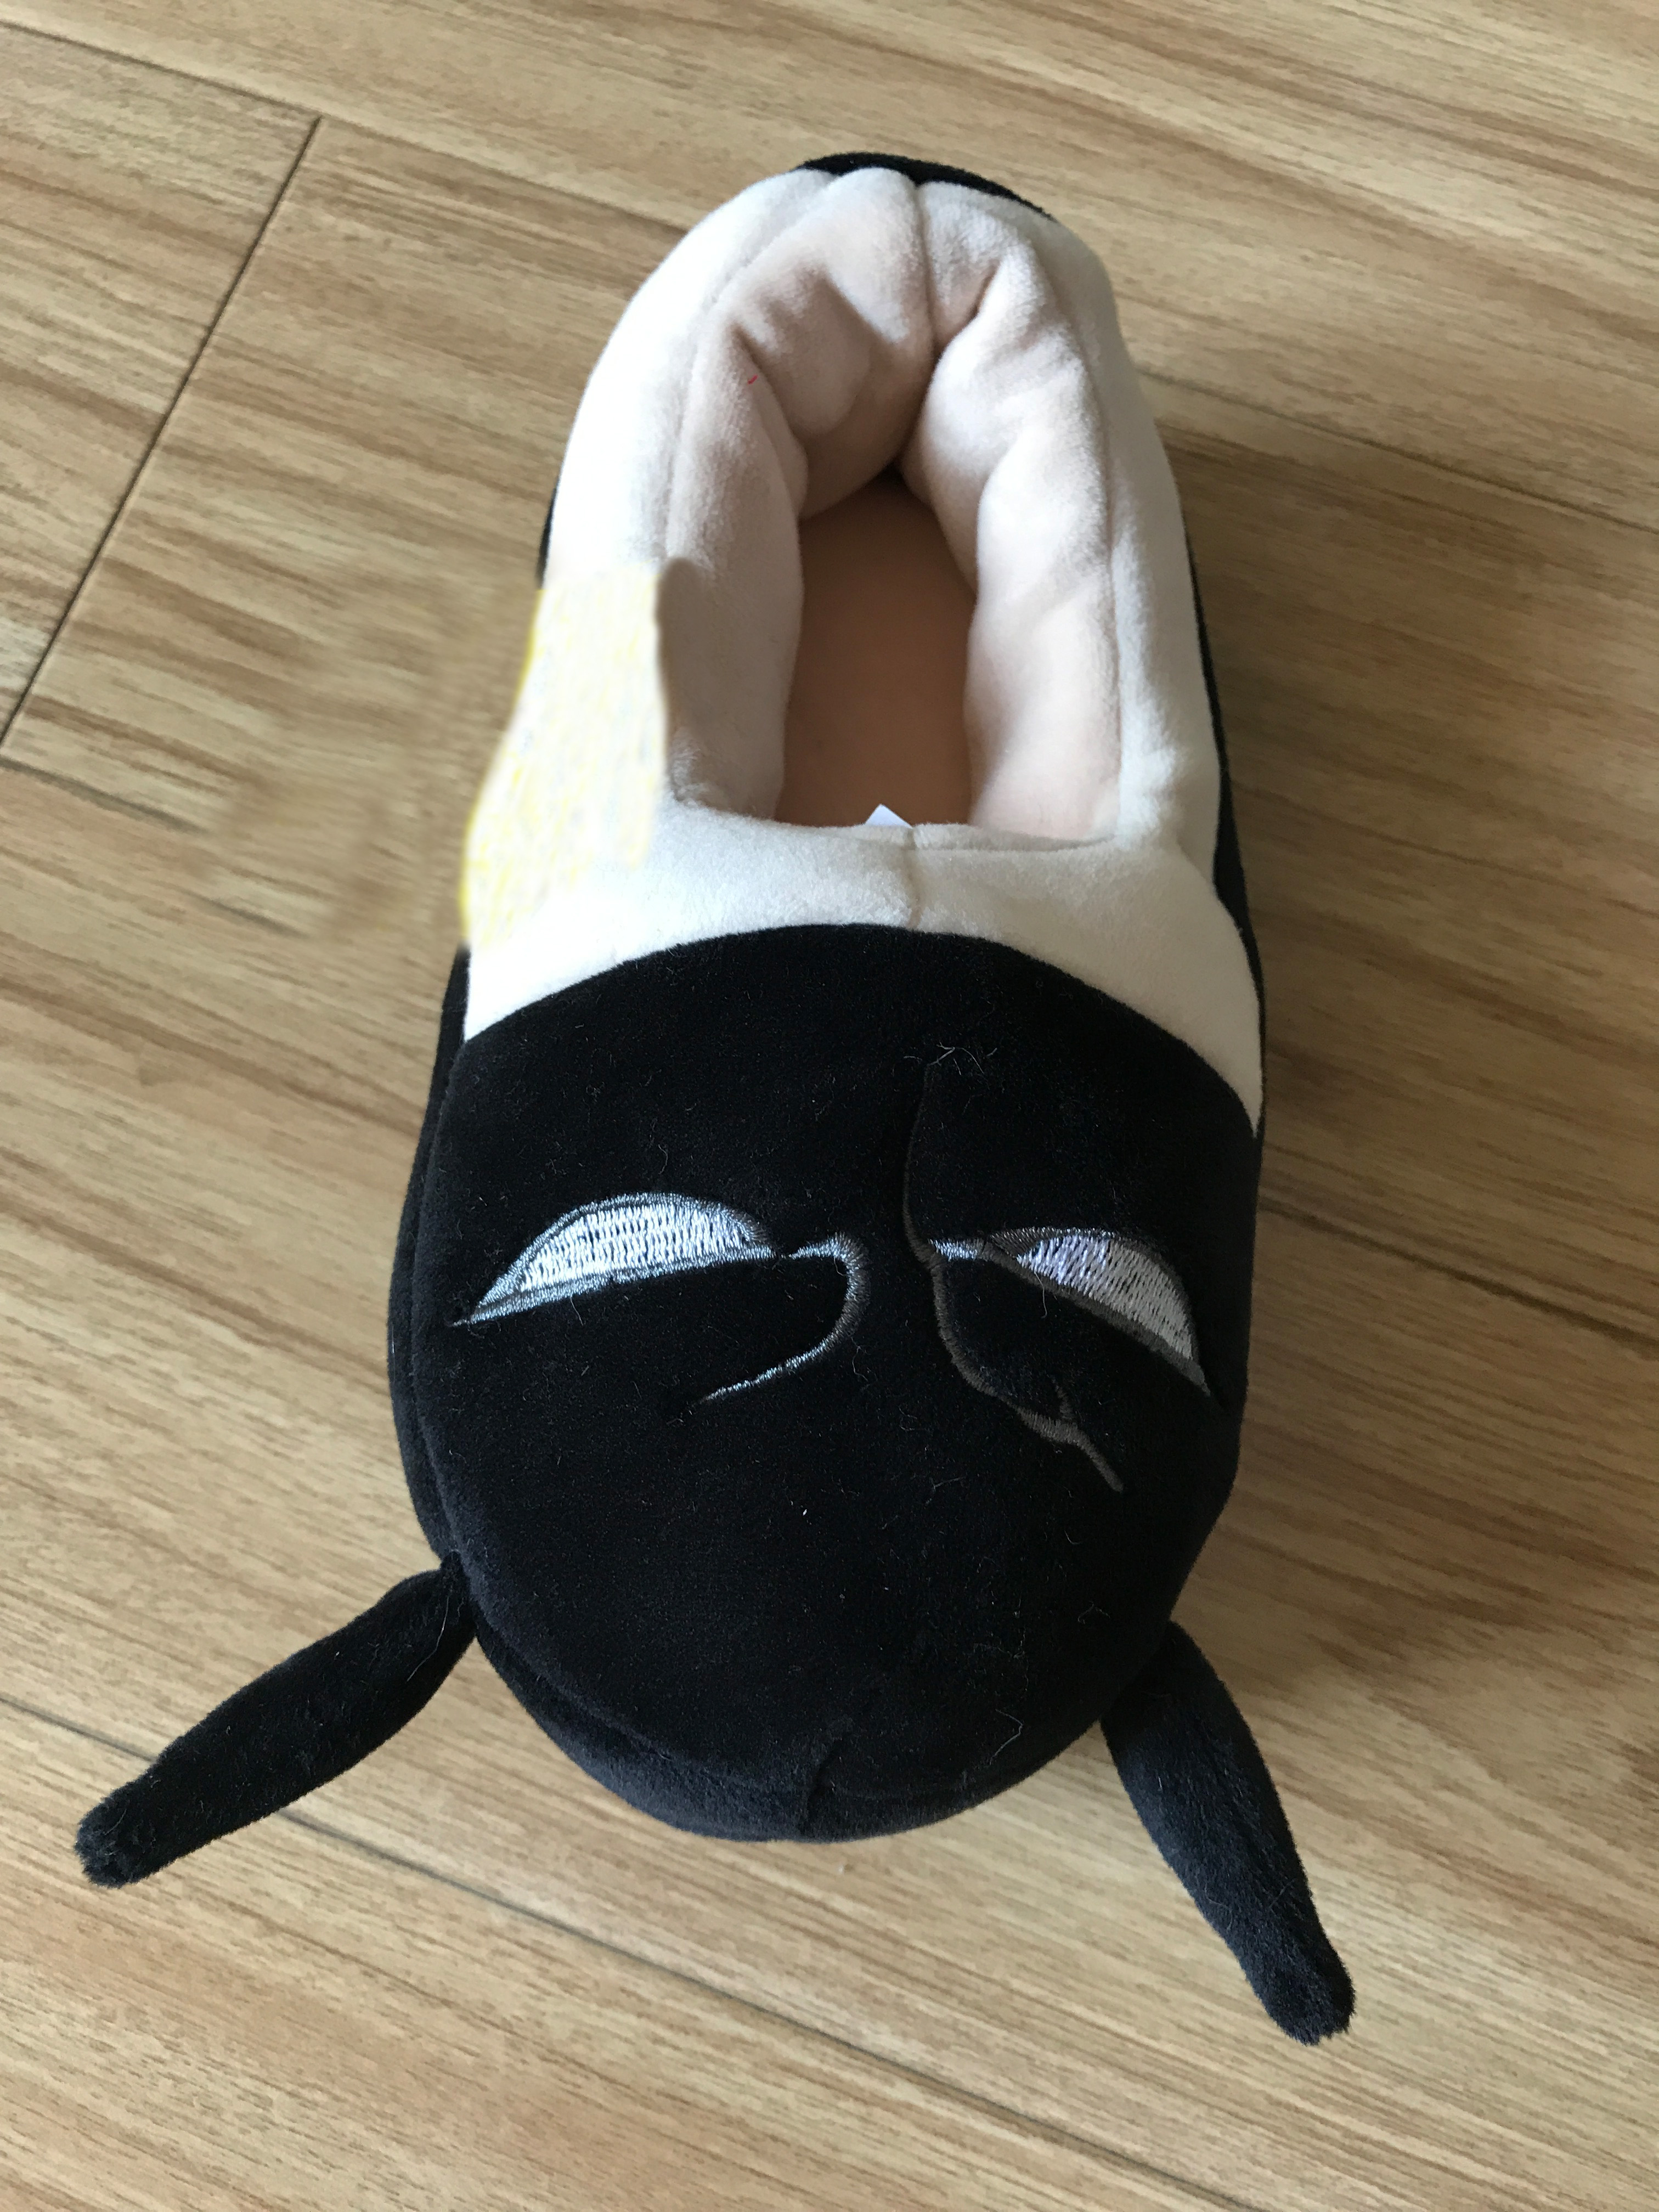 Junior Girls' Boys' Slippers Kids' Warm House Shoes Slip On Winter Indoor Shoes Cartoon House Slippers 